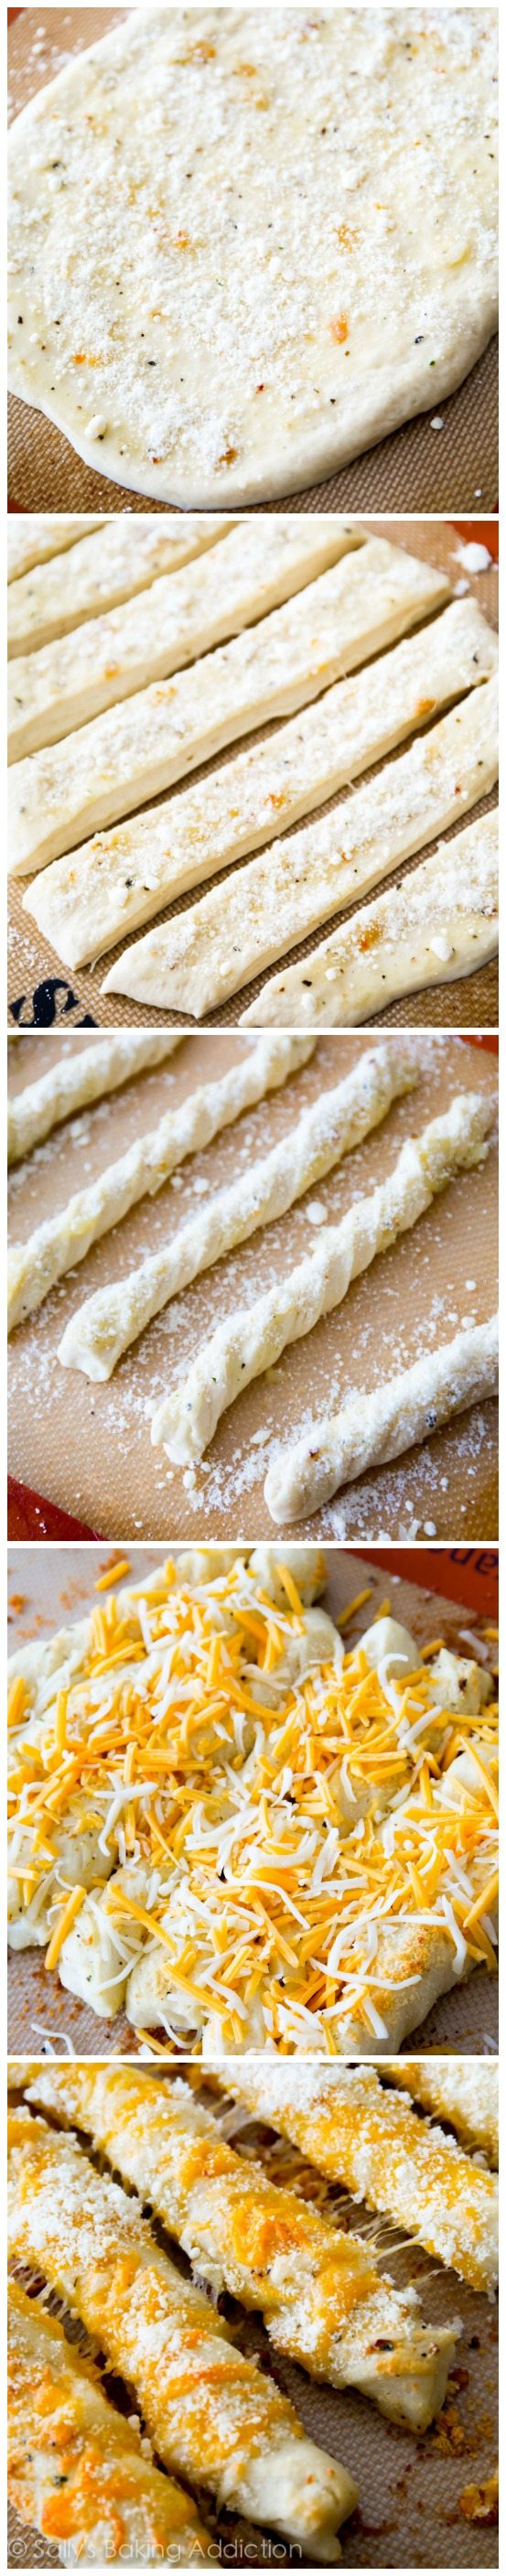 5 images showing how to make cheesy breadsticks